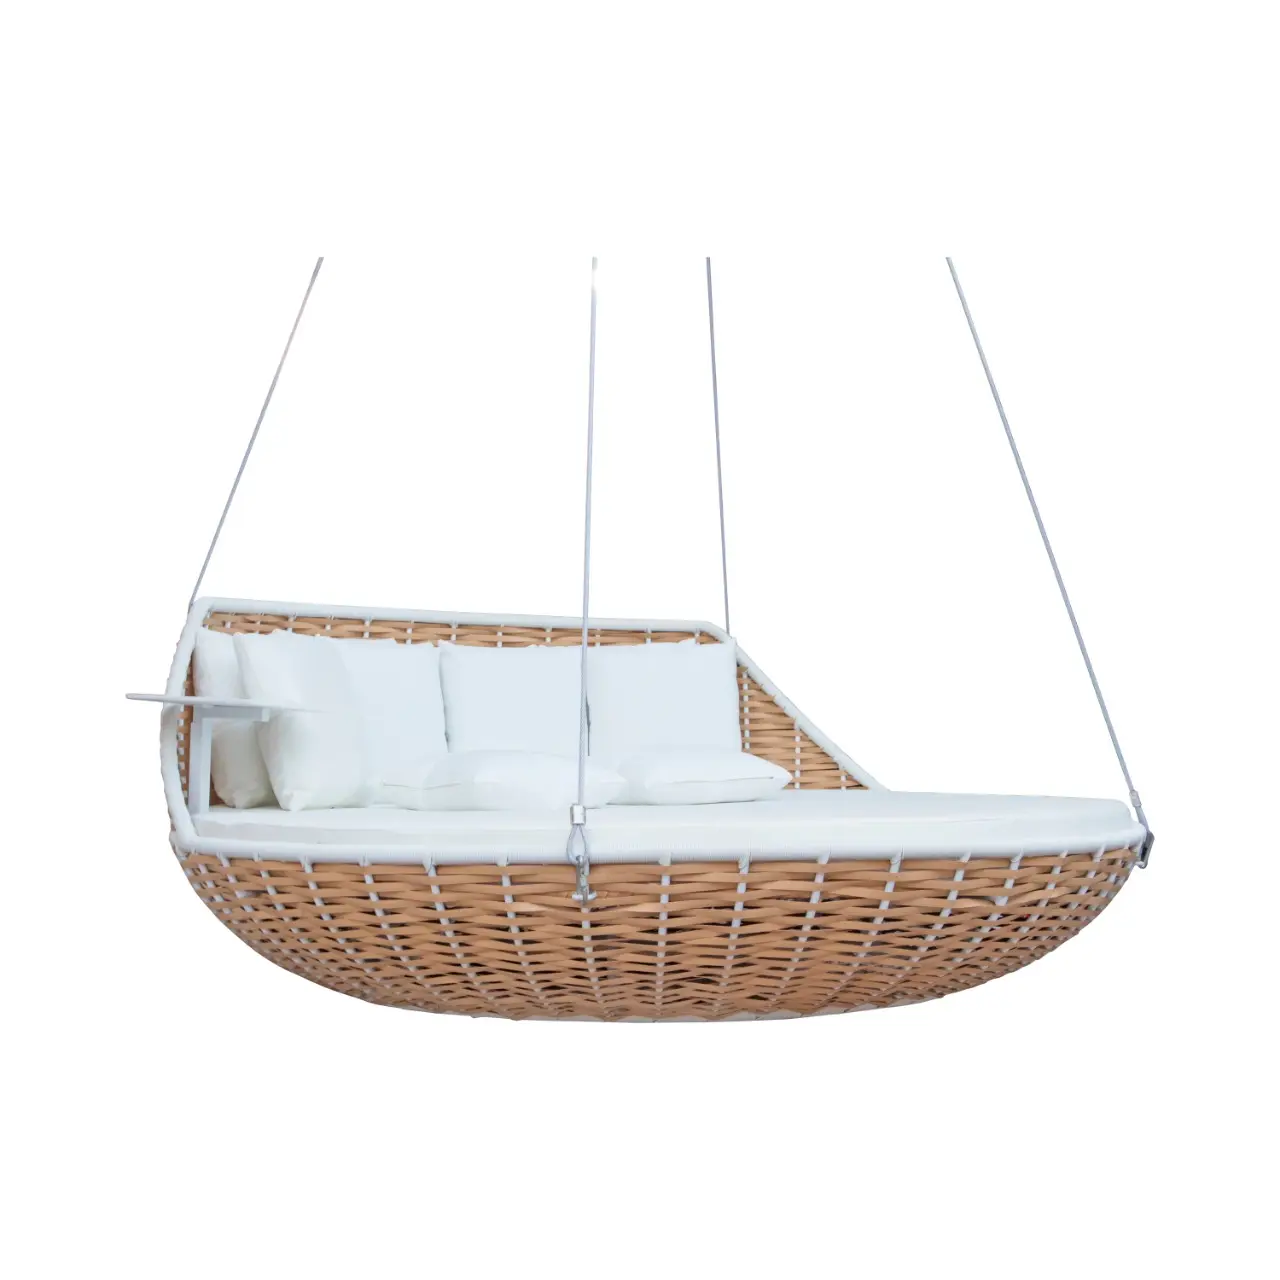 Good Quality Hanging Round Bed With rattan wicker Patio handwoven for Outdoor Bed Hanging Swing Garden